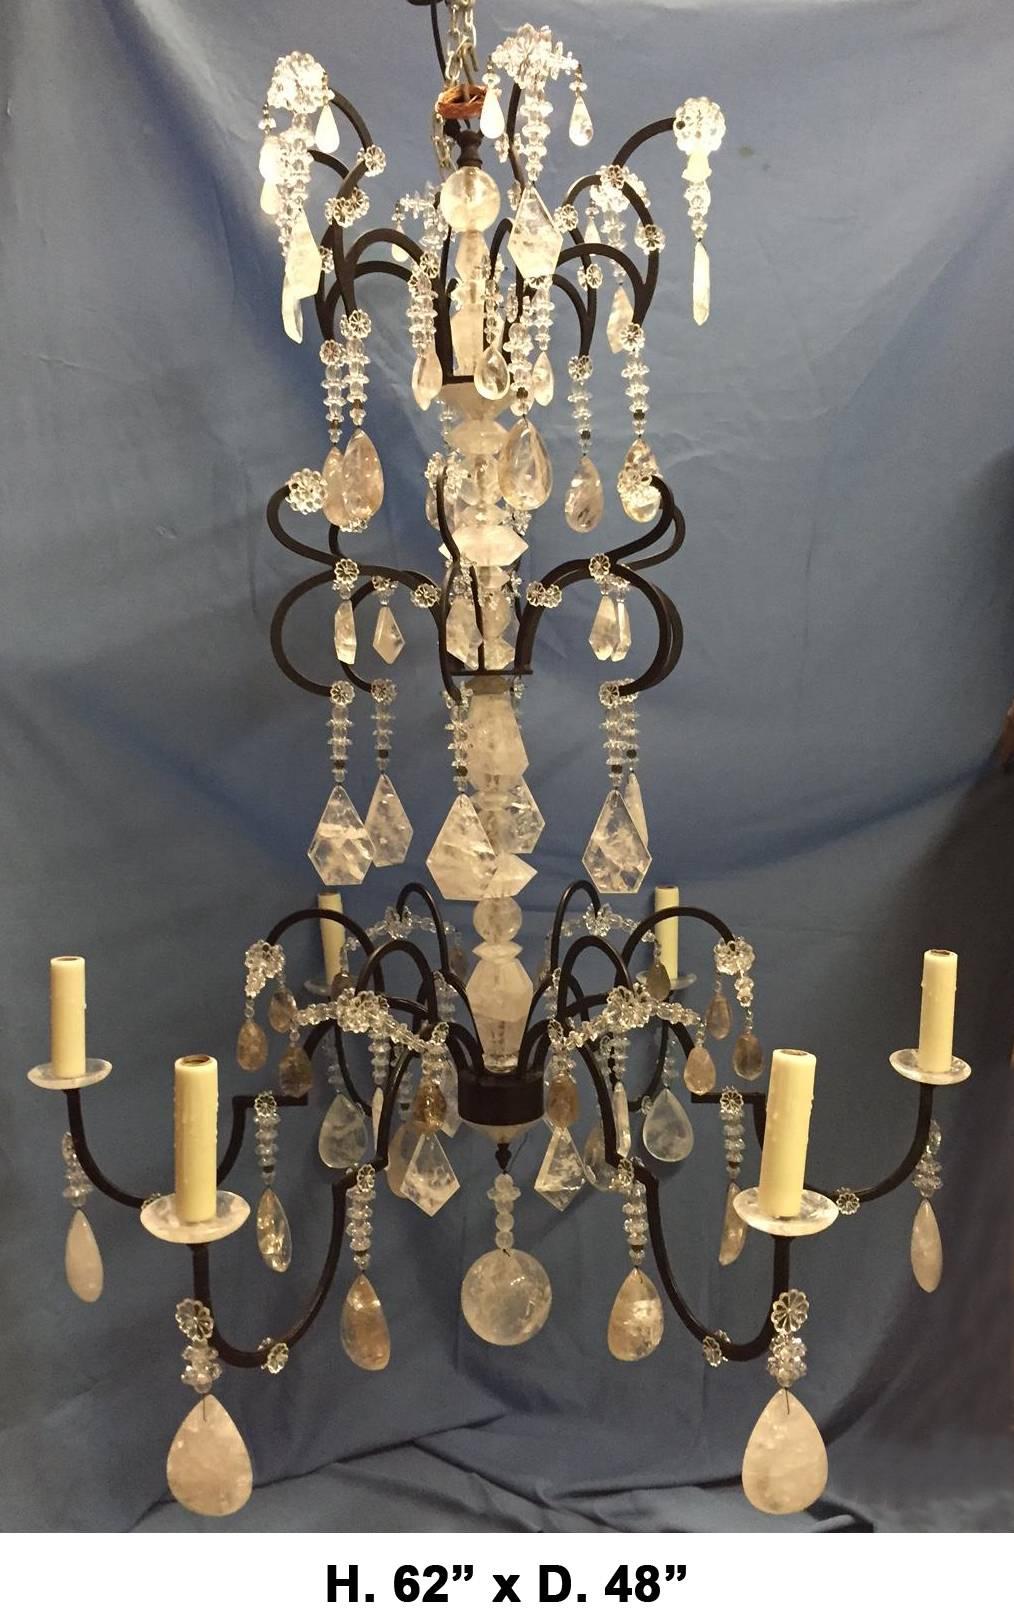 Attractive neoclassical style hand-forged wrought iron dressed with hand-carved and polished rock crystal and smokey rock crystal six-light chandelier.
Antique black patina.
Handmade bees wax candle sleeves.
4 foot chain and canopy included.
 